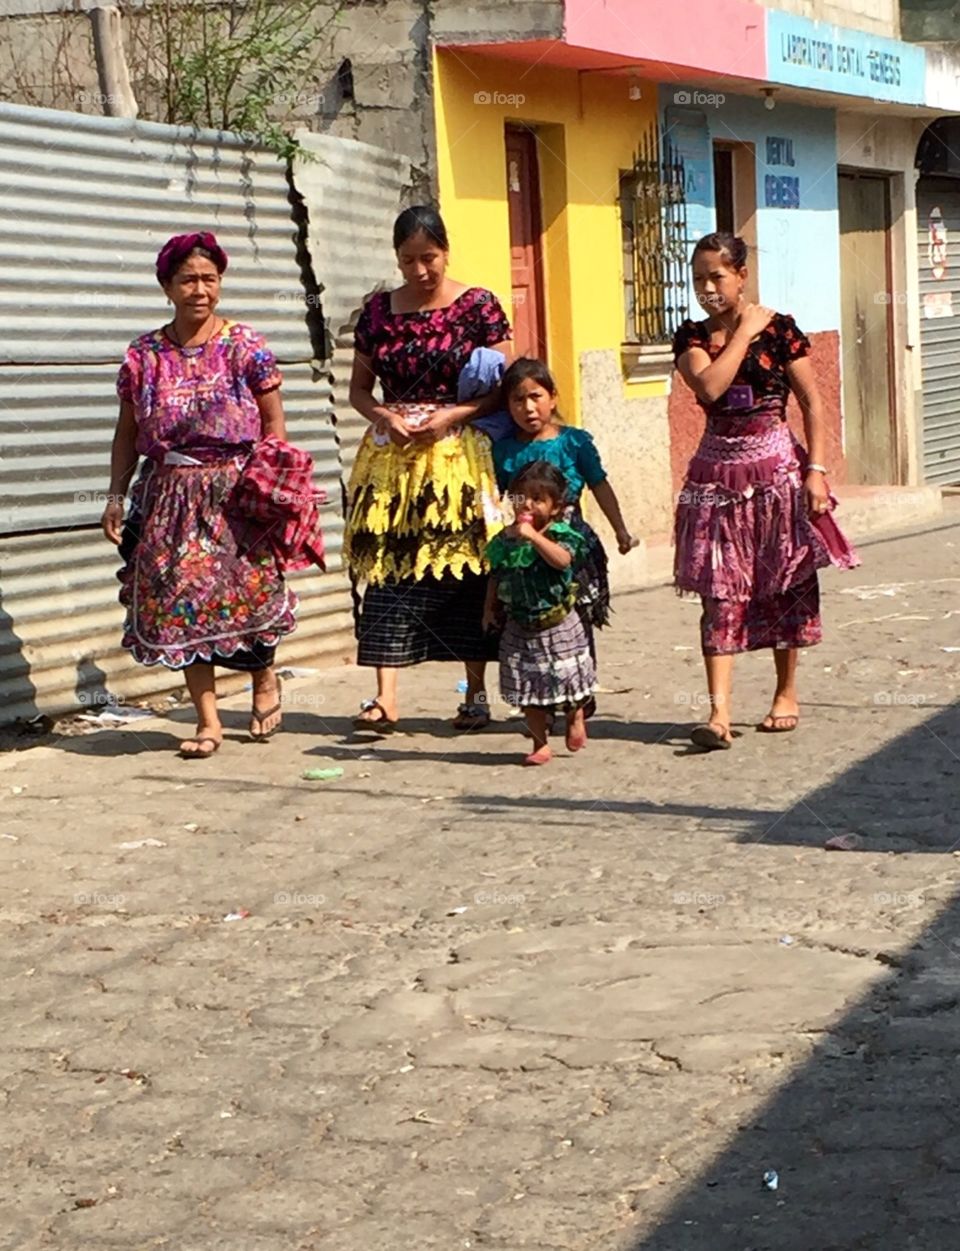 Colorful People Of Guatemala. Ladies dressed in traditional Mayan colors